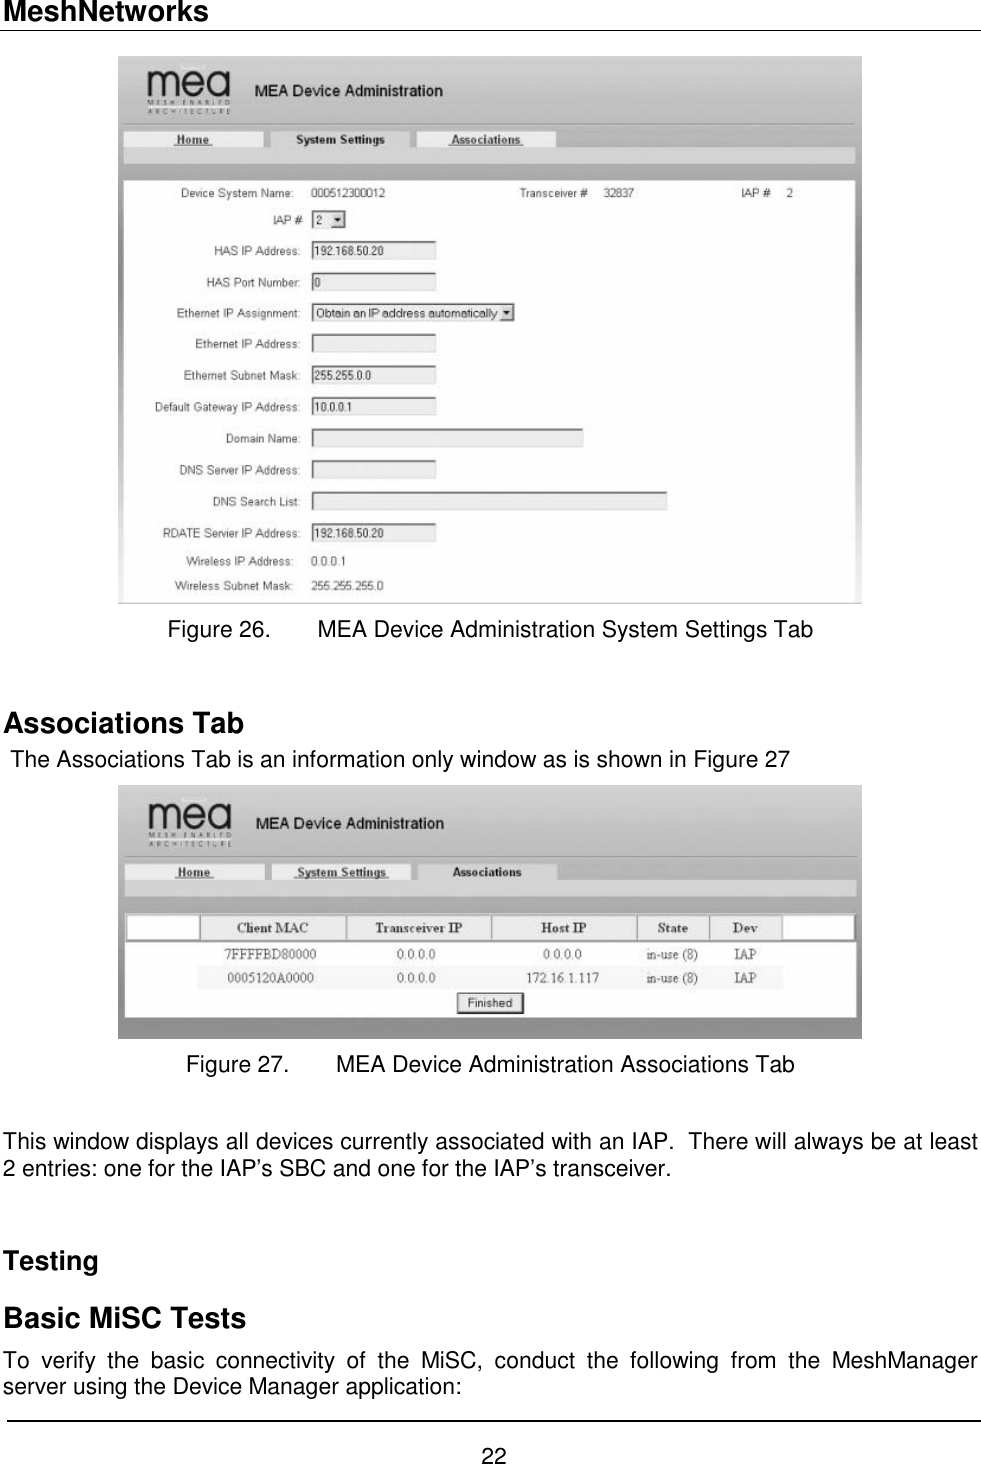 MeshNetworks 22  Figure 26.  MEA Device Administration System Settings Tab  Associations Tab The Associations Tab is an information only window as is shown in Figure 27  Figure 27.  MEA Device Administration Associations Tab  This window displays all devices currently associated with an IAP.  There will always be at least 2 entries: one for the IAP’s SBC and one for the IAP’s transceiver.    Testing  Basic MiSC Tests To verify the basic connectivity of the MiSC, conduct the following from the MeshManager server using the Device Manager application: 